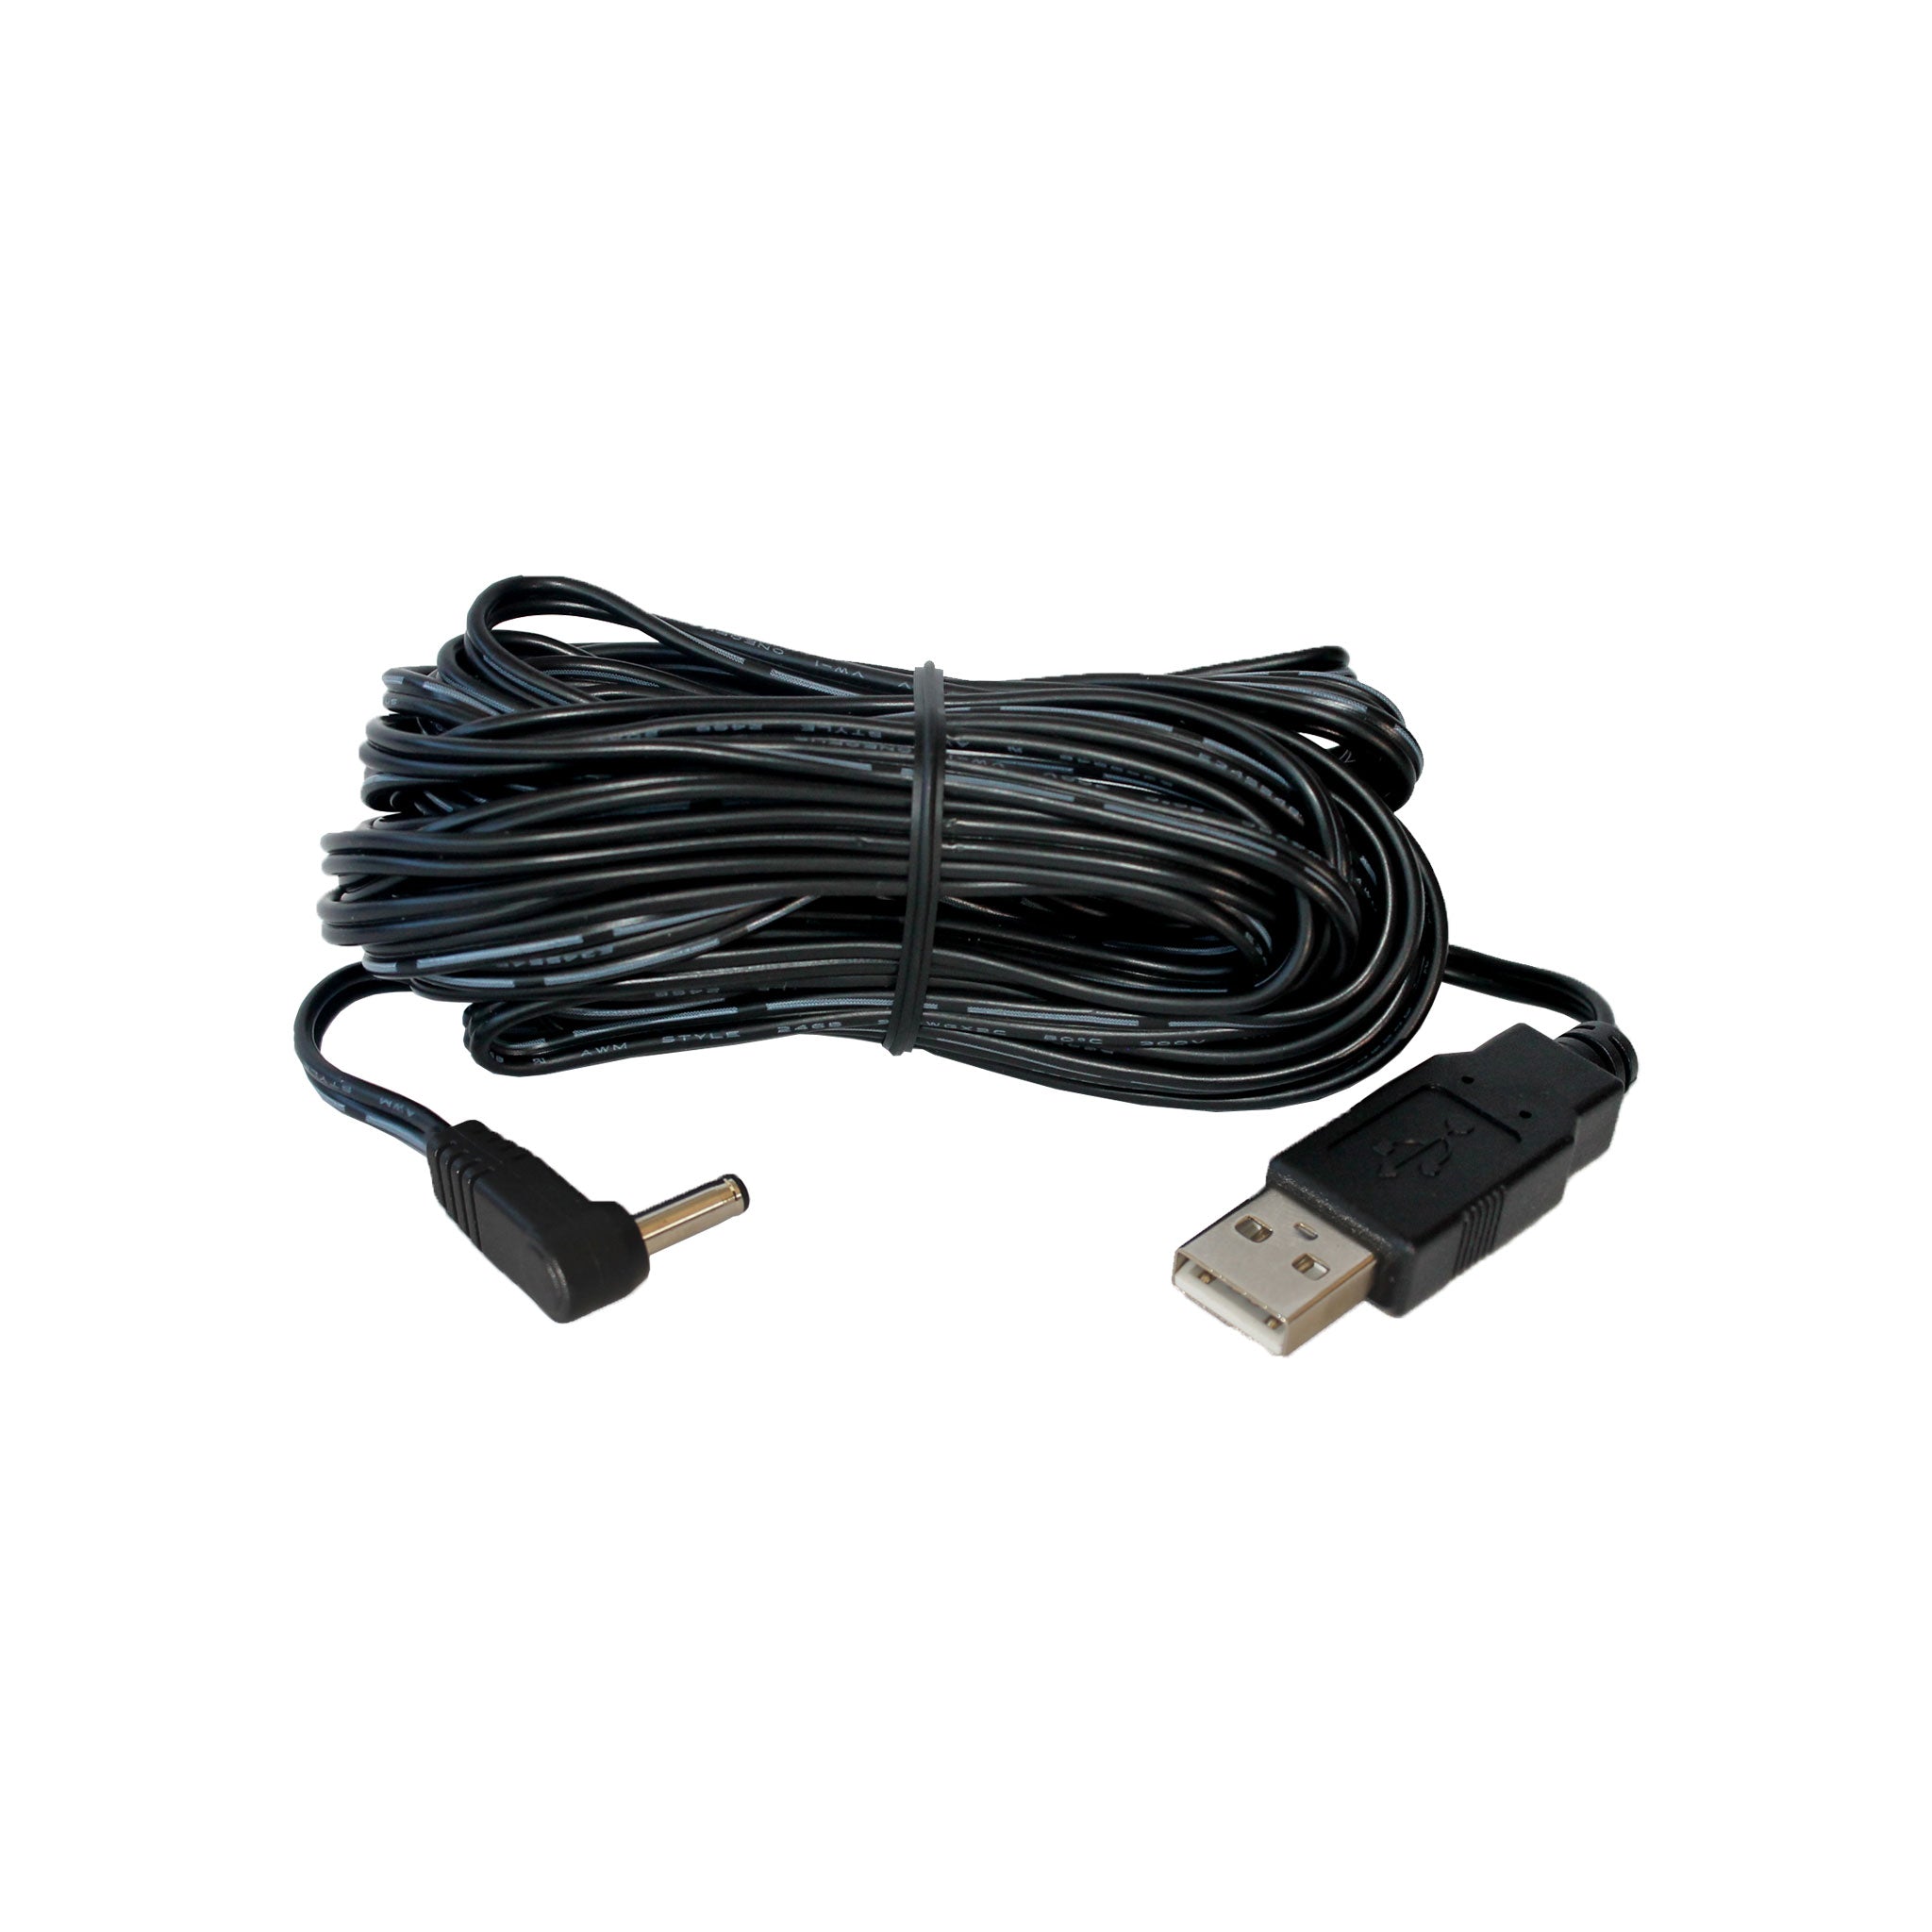  V7 3M Power Cable Extension - Black : Musical Instruments